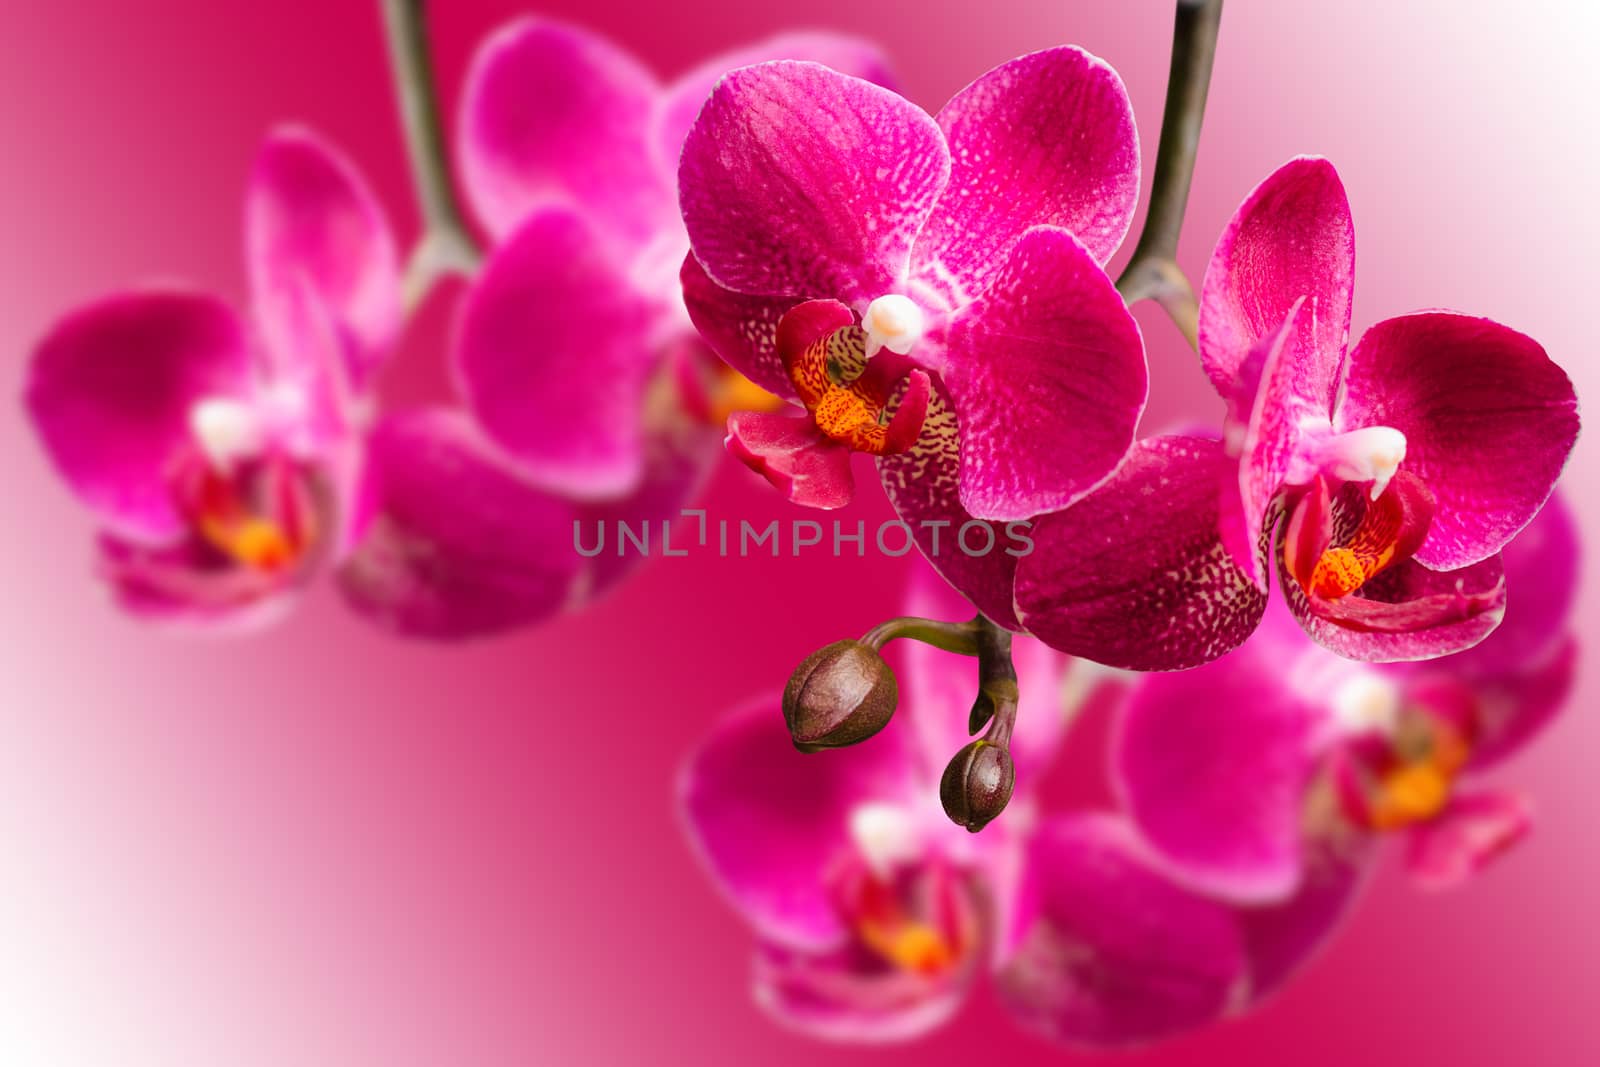 Dark purple orchids on blurred gradient background with copy-space